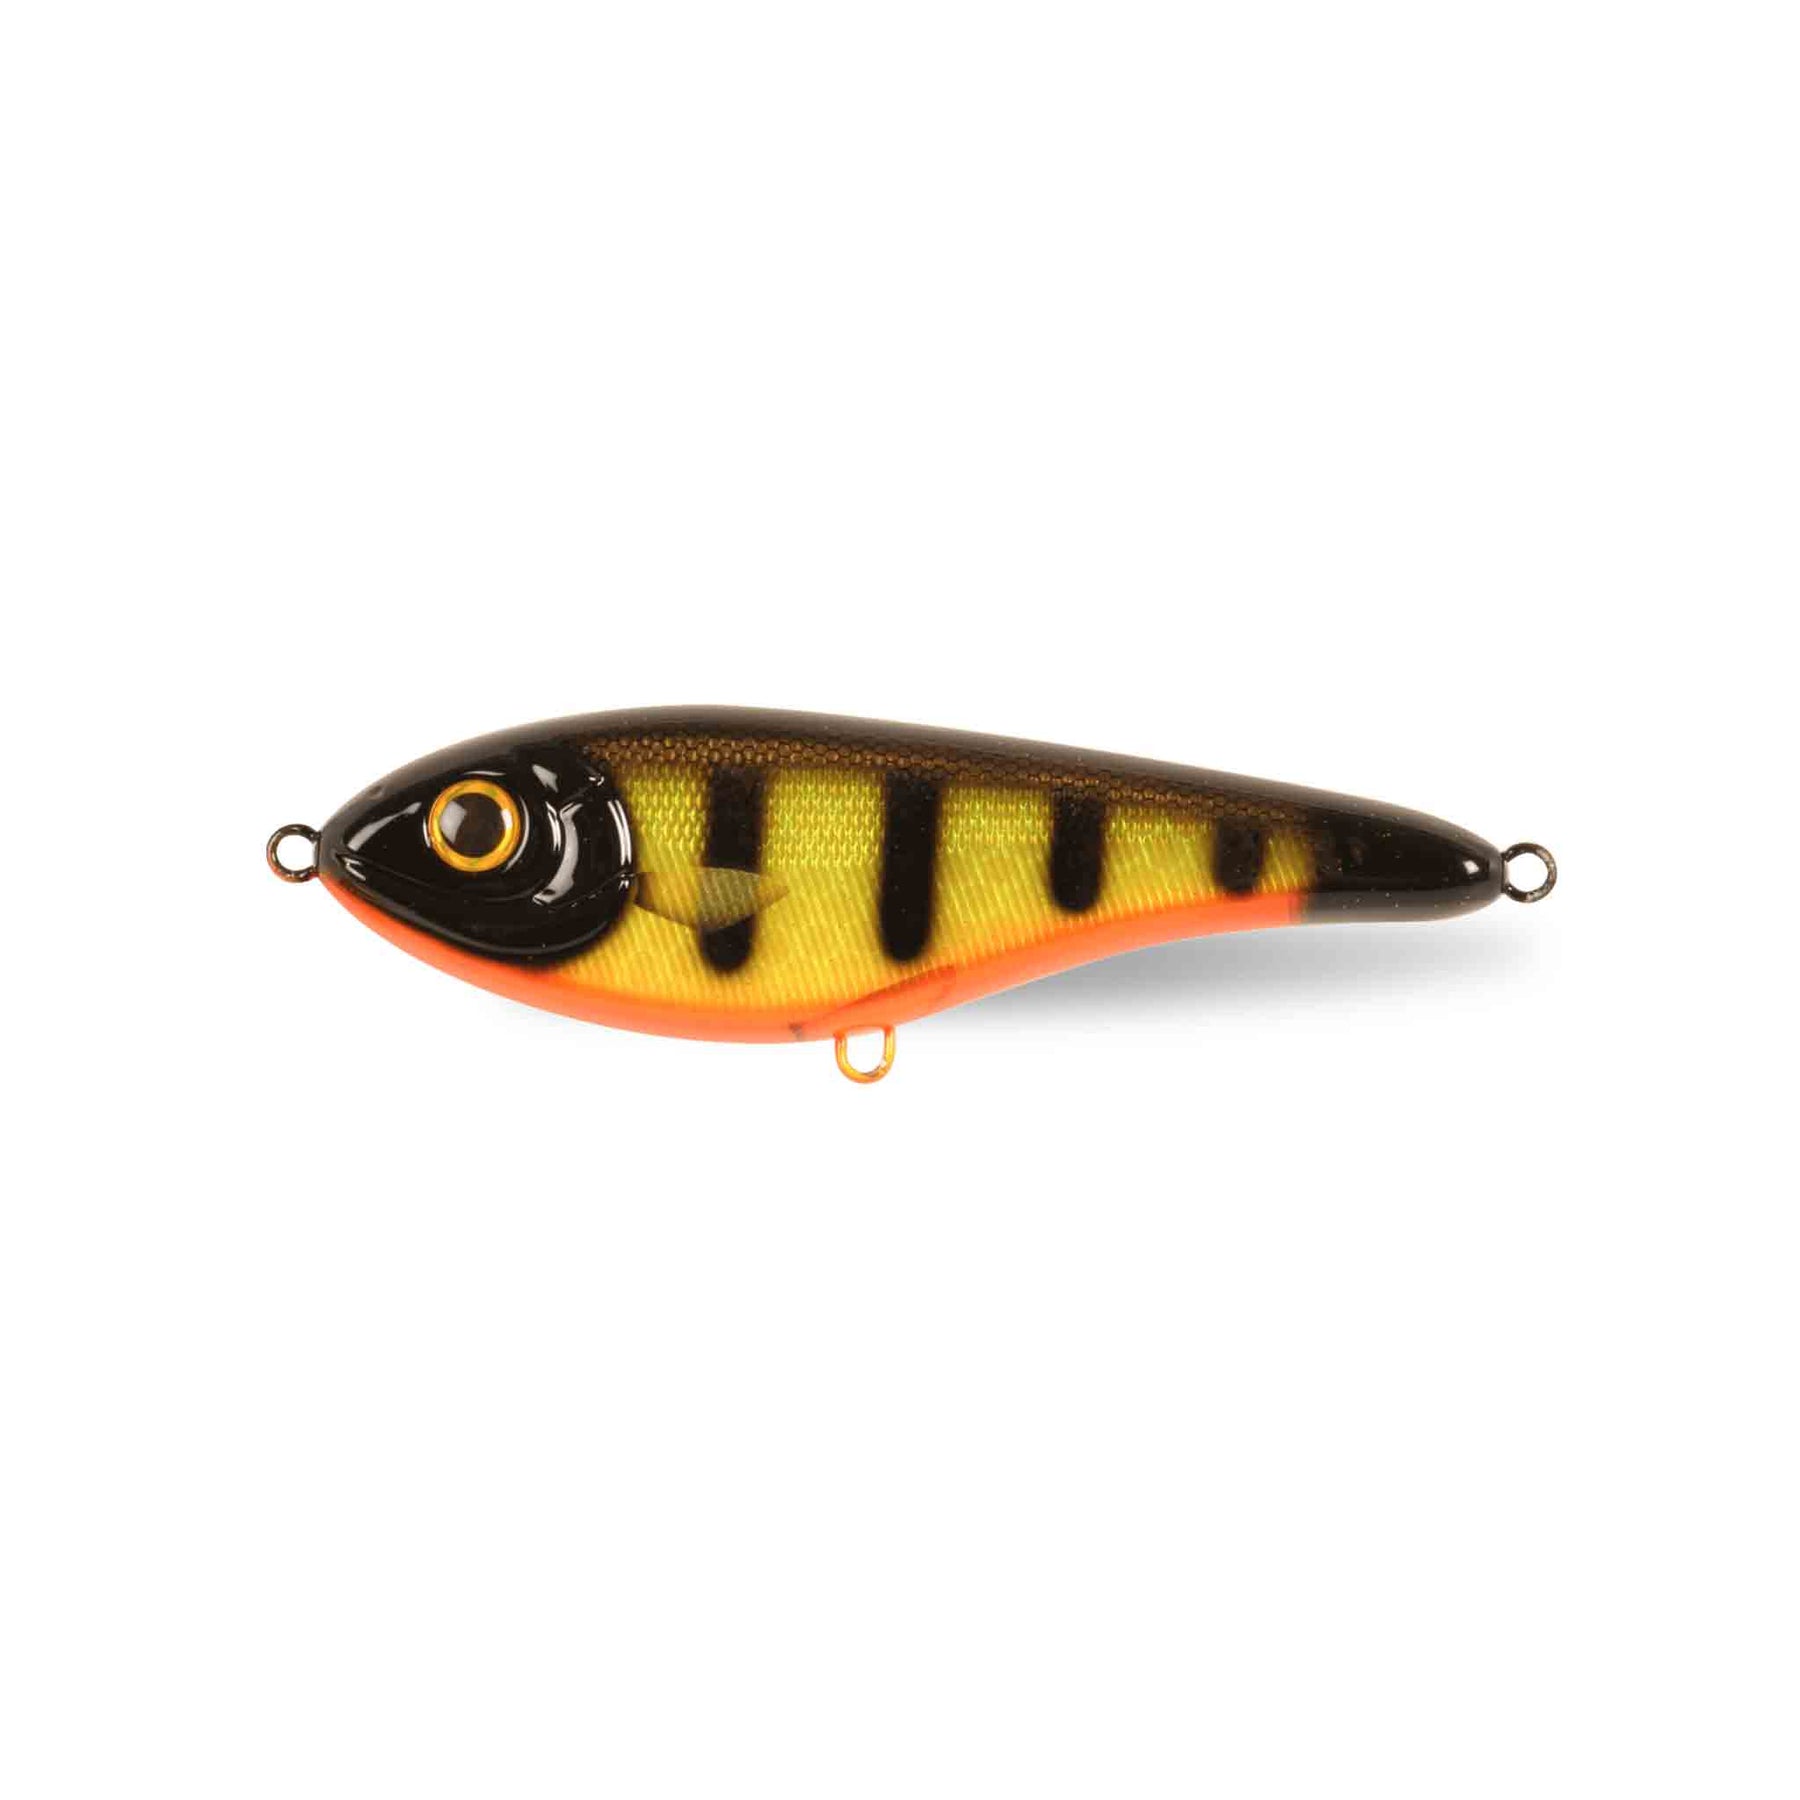 View of Jerk-Glide_Baits Strike Pro Buster Jerk Sinking Glide Bait Black Okoboji Perch available at EZOKO Pike and Musky Shop